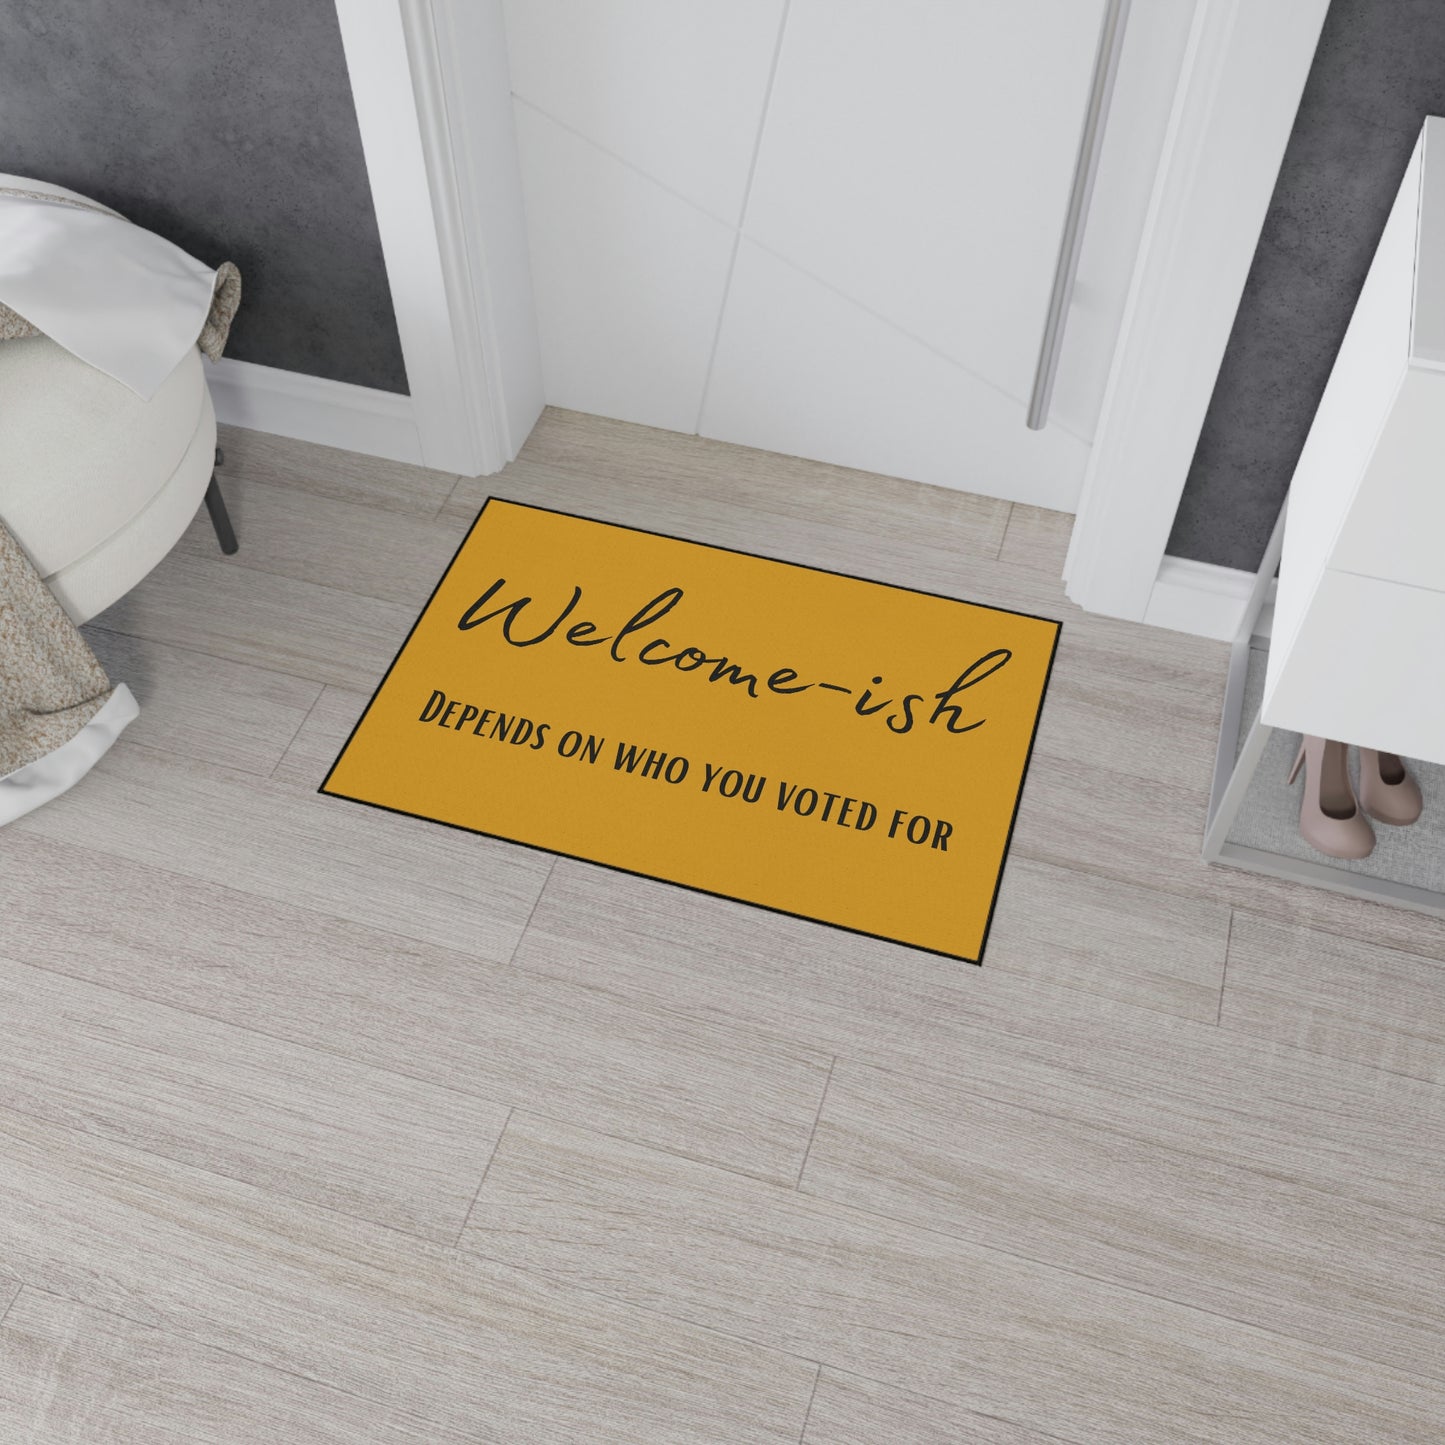 Funny "Welcome-ish" door mat for politically savvy hosts